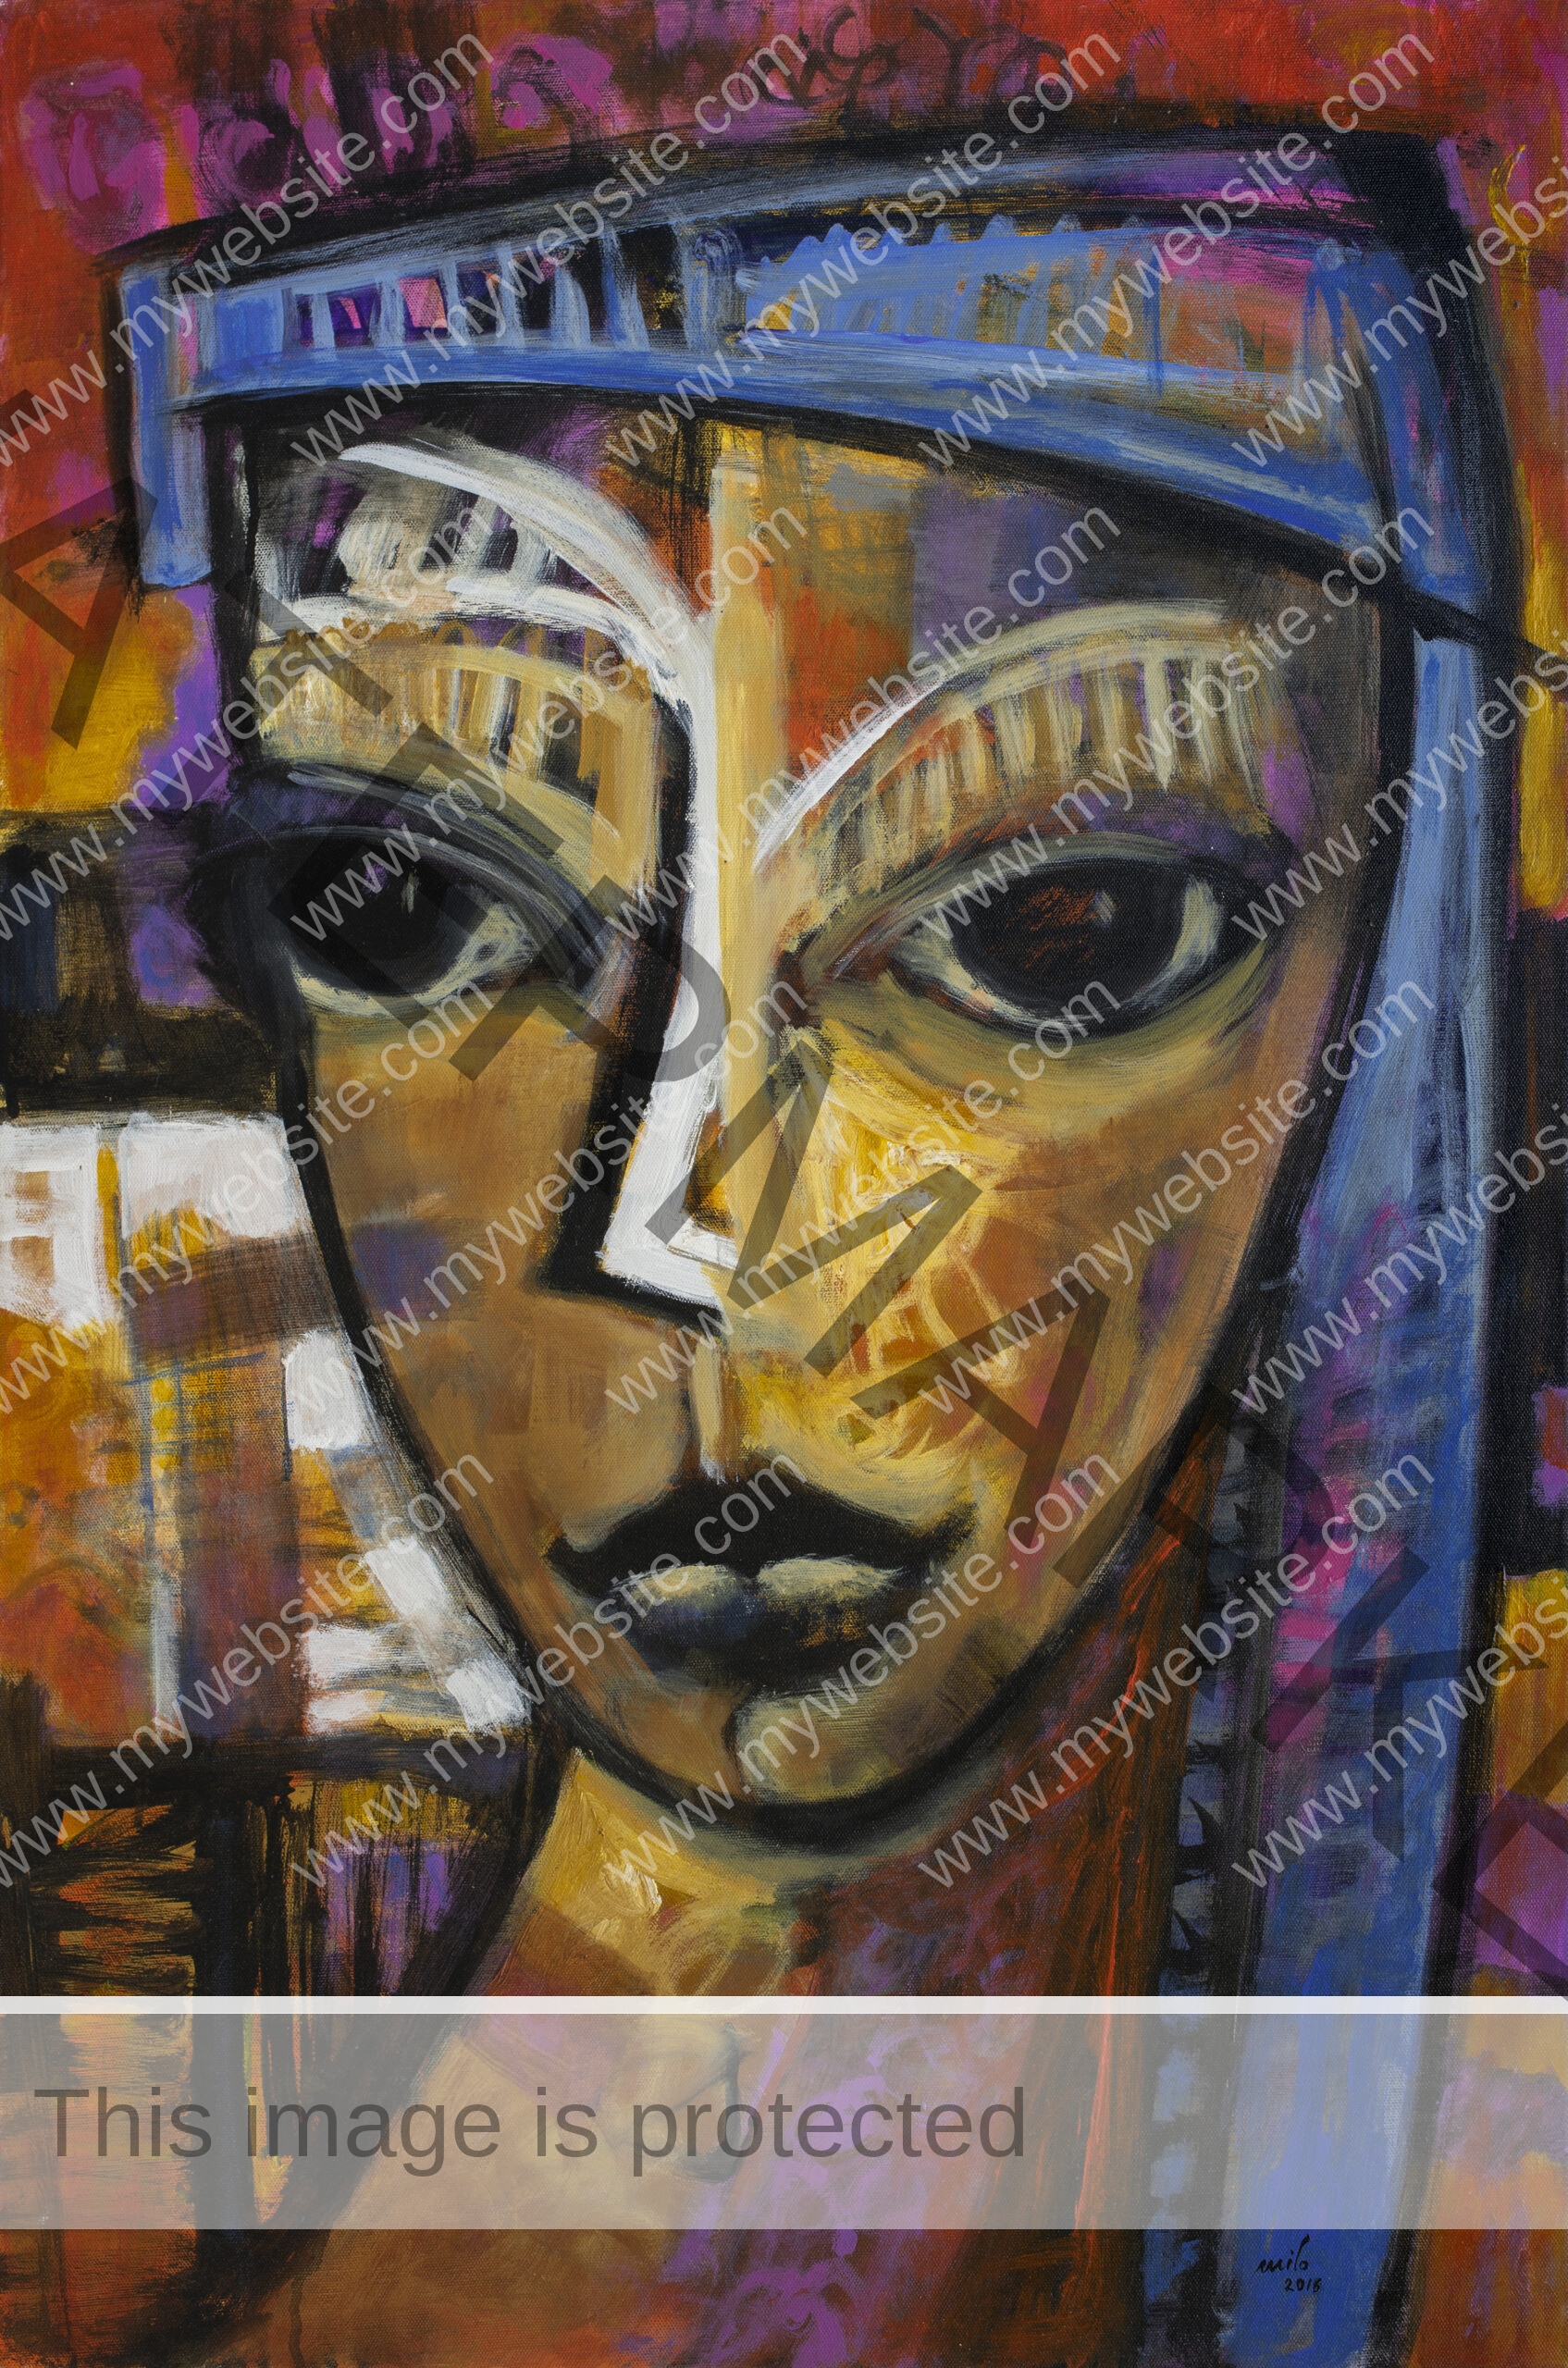 cubist portrait painting of a woman by Milo Gonzalez. It's sensual and intimate as we focus in on her face, her large eyes staring out of the canvas. The earthy colour pallet is elevated with blues and purples, adding to the sensuality.